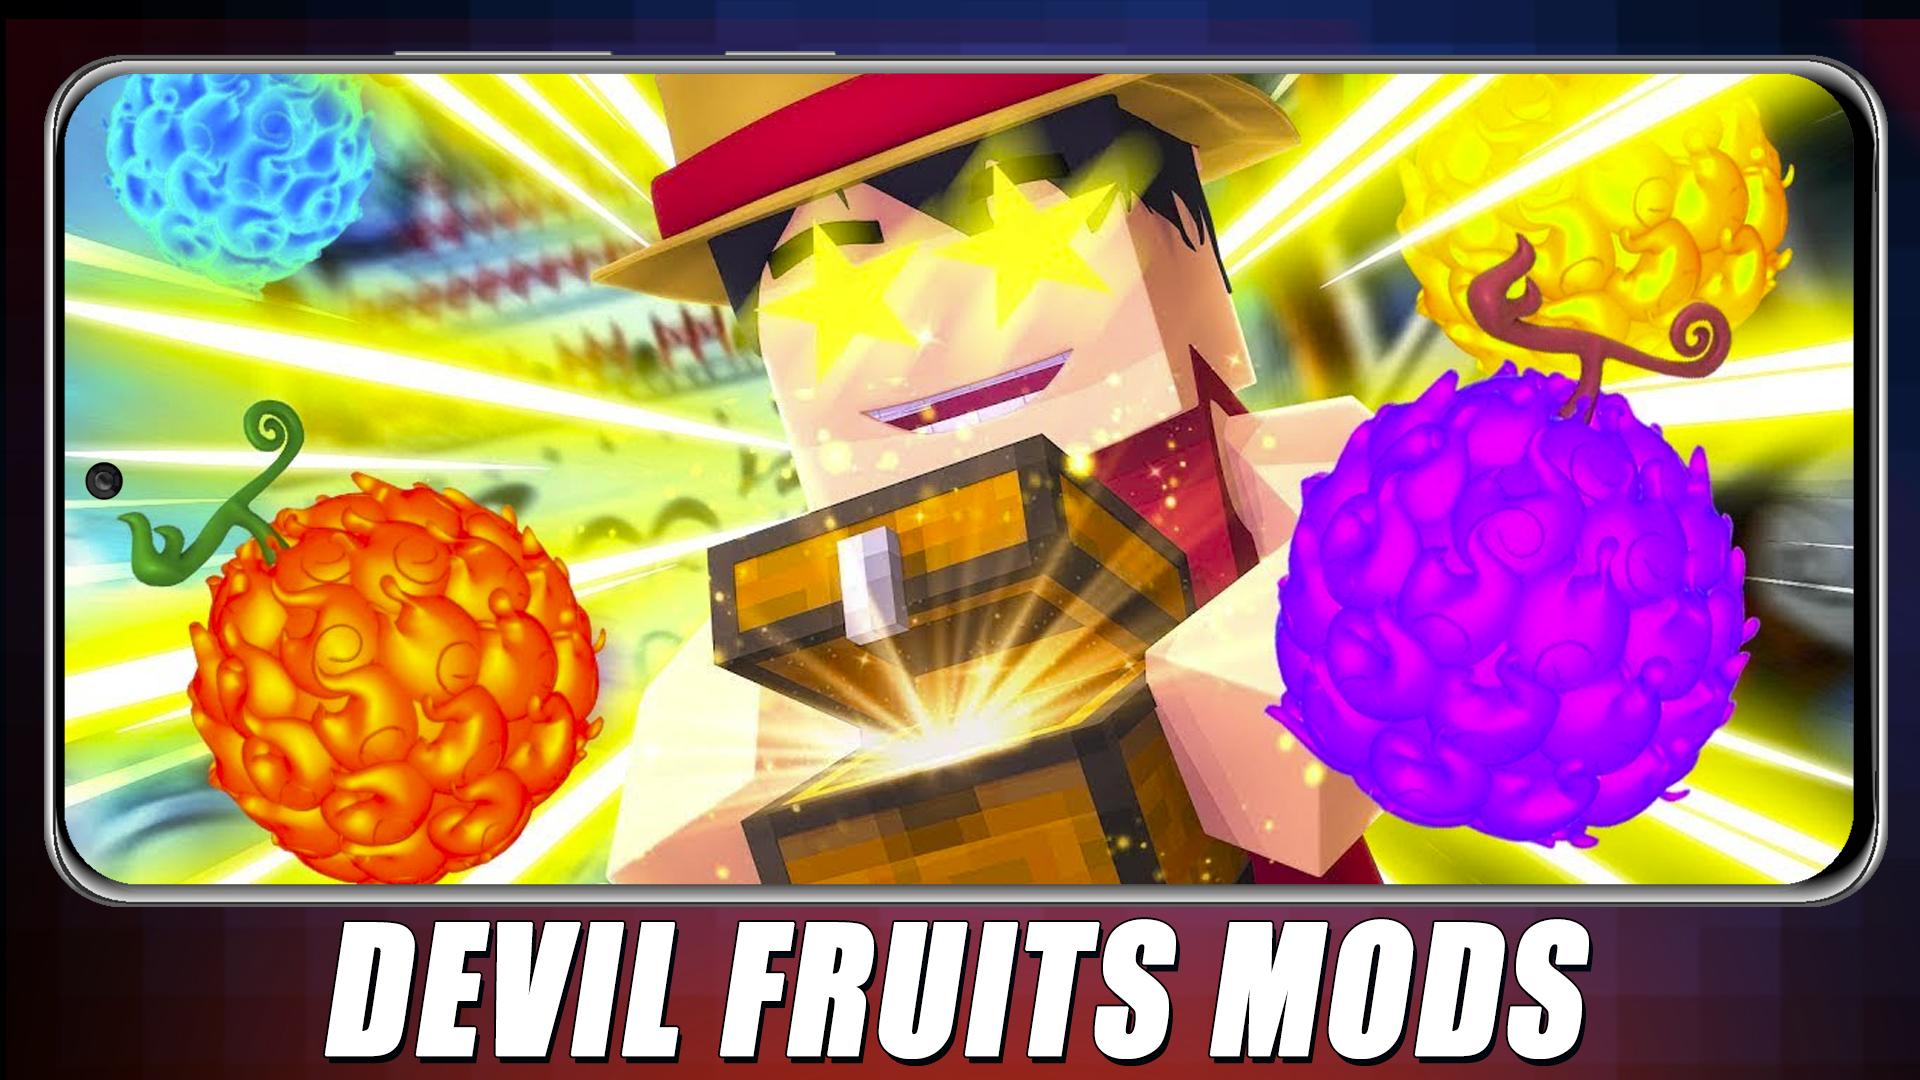 About: mod blox-fruit for roblox (Google Play version)